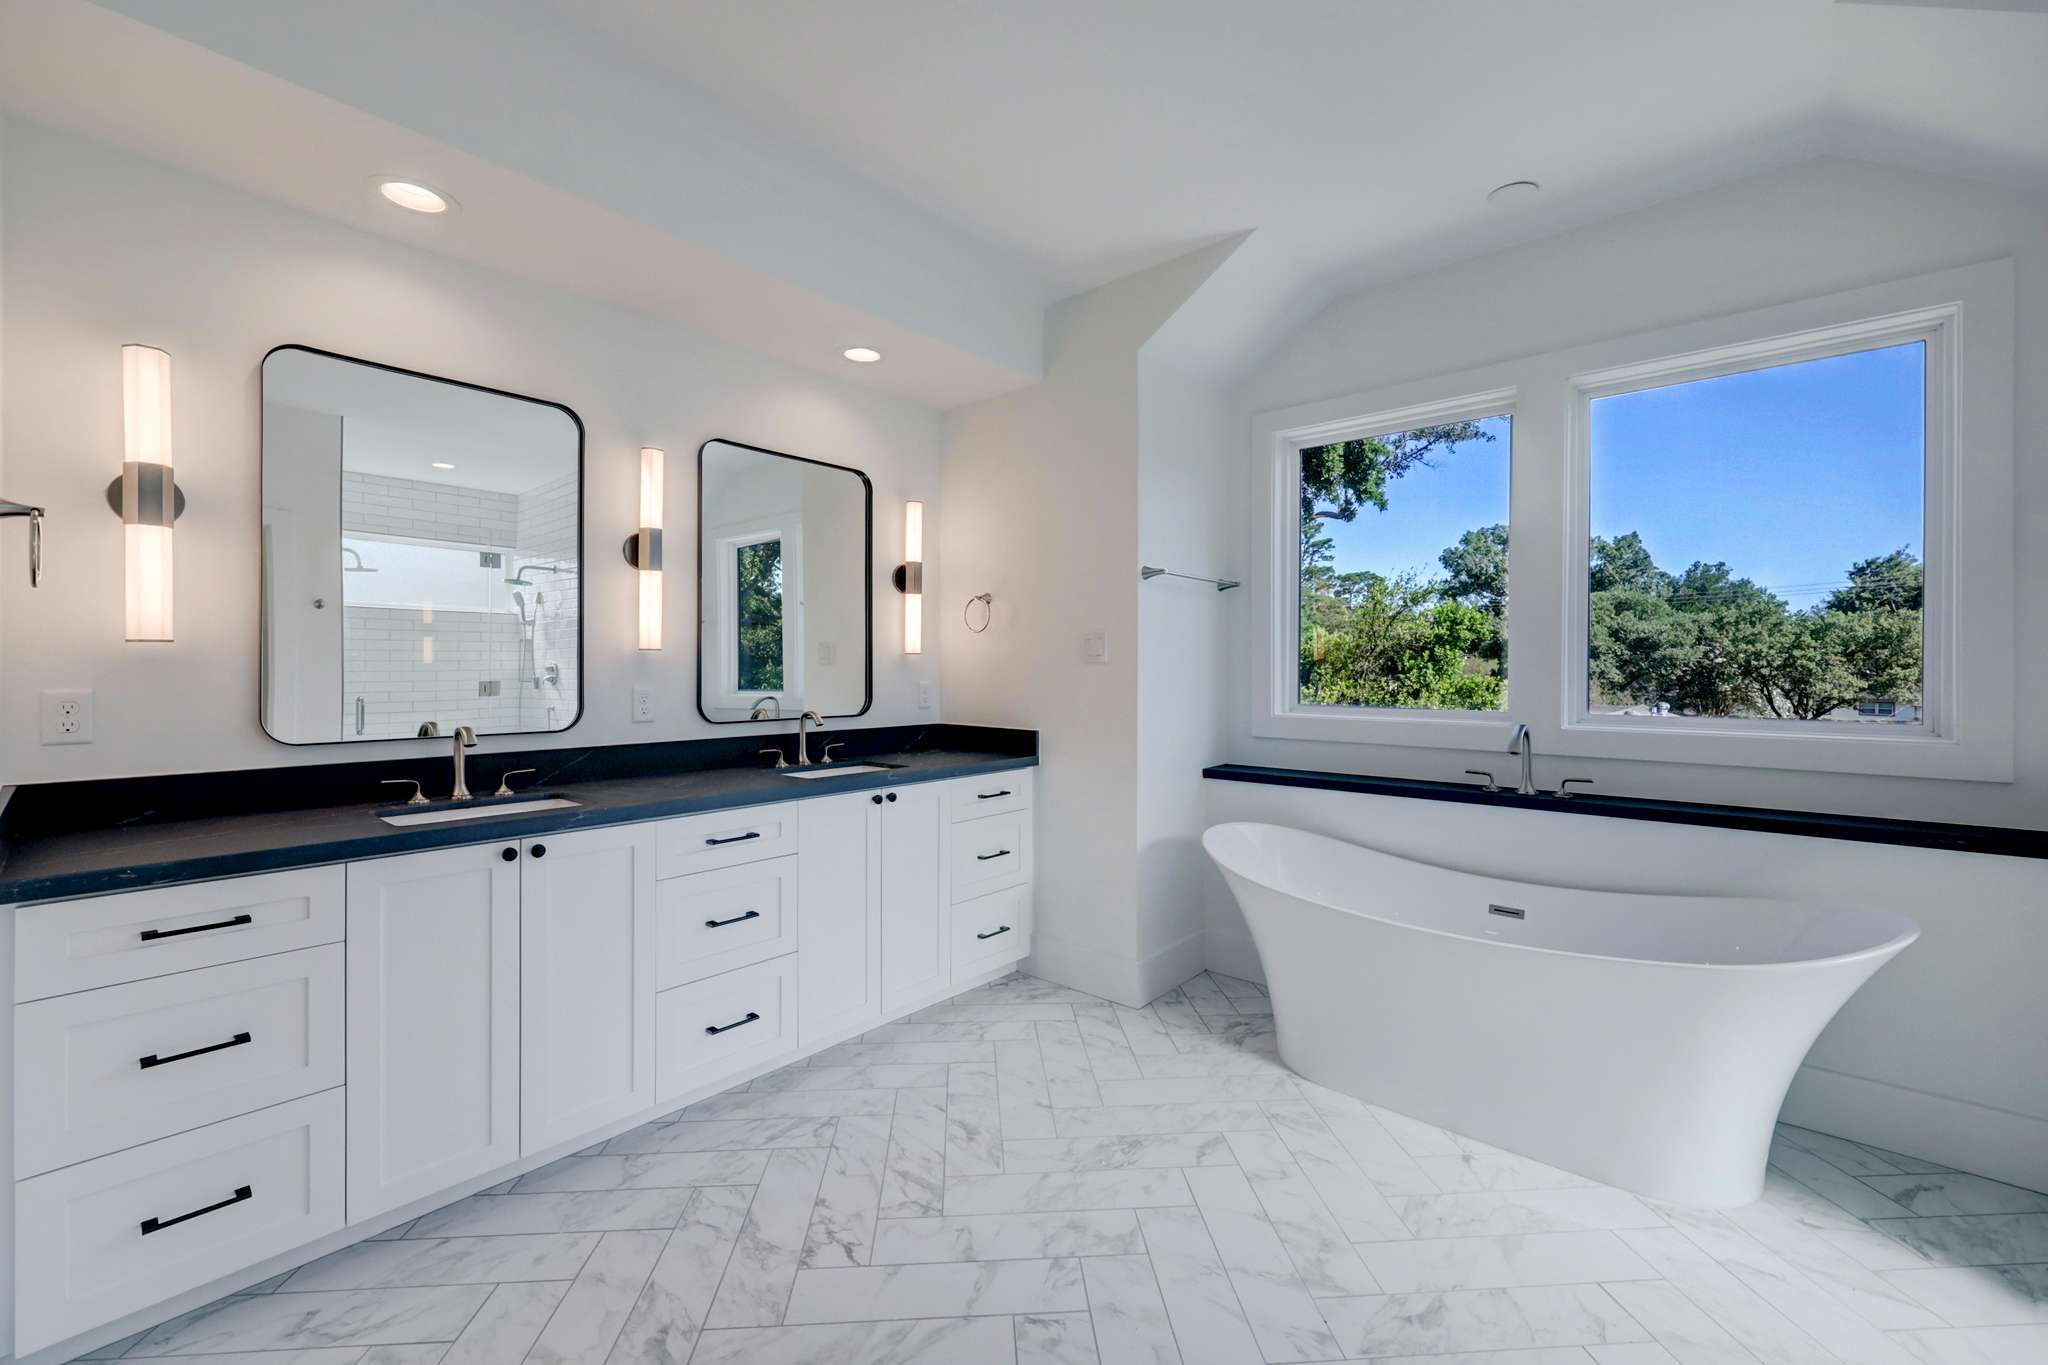 A bright bathroom with a white freestanding tub near a window, dual vanity with black countertops, and white cabinets.